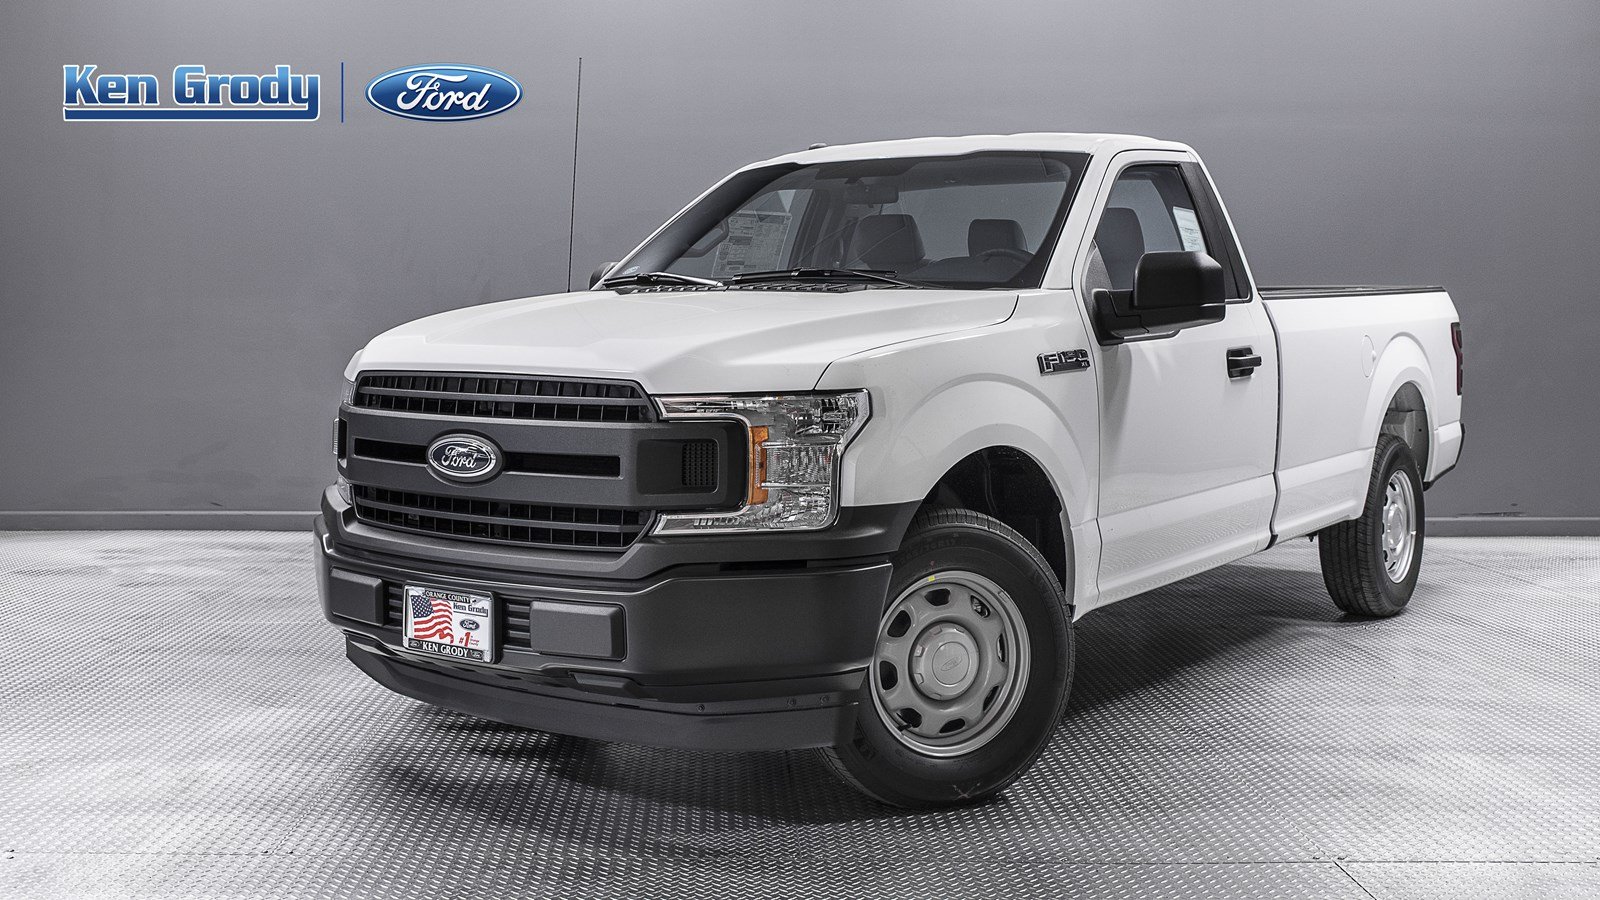 New 2019 Ford F 150 Xl Regular Cab Pickup In Buena Park